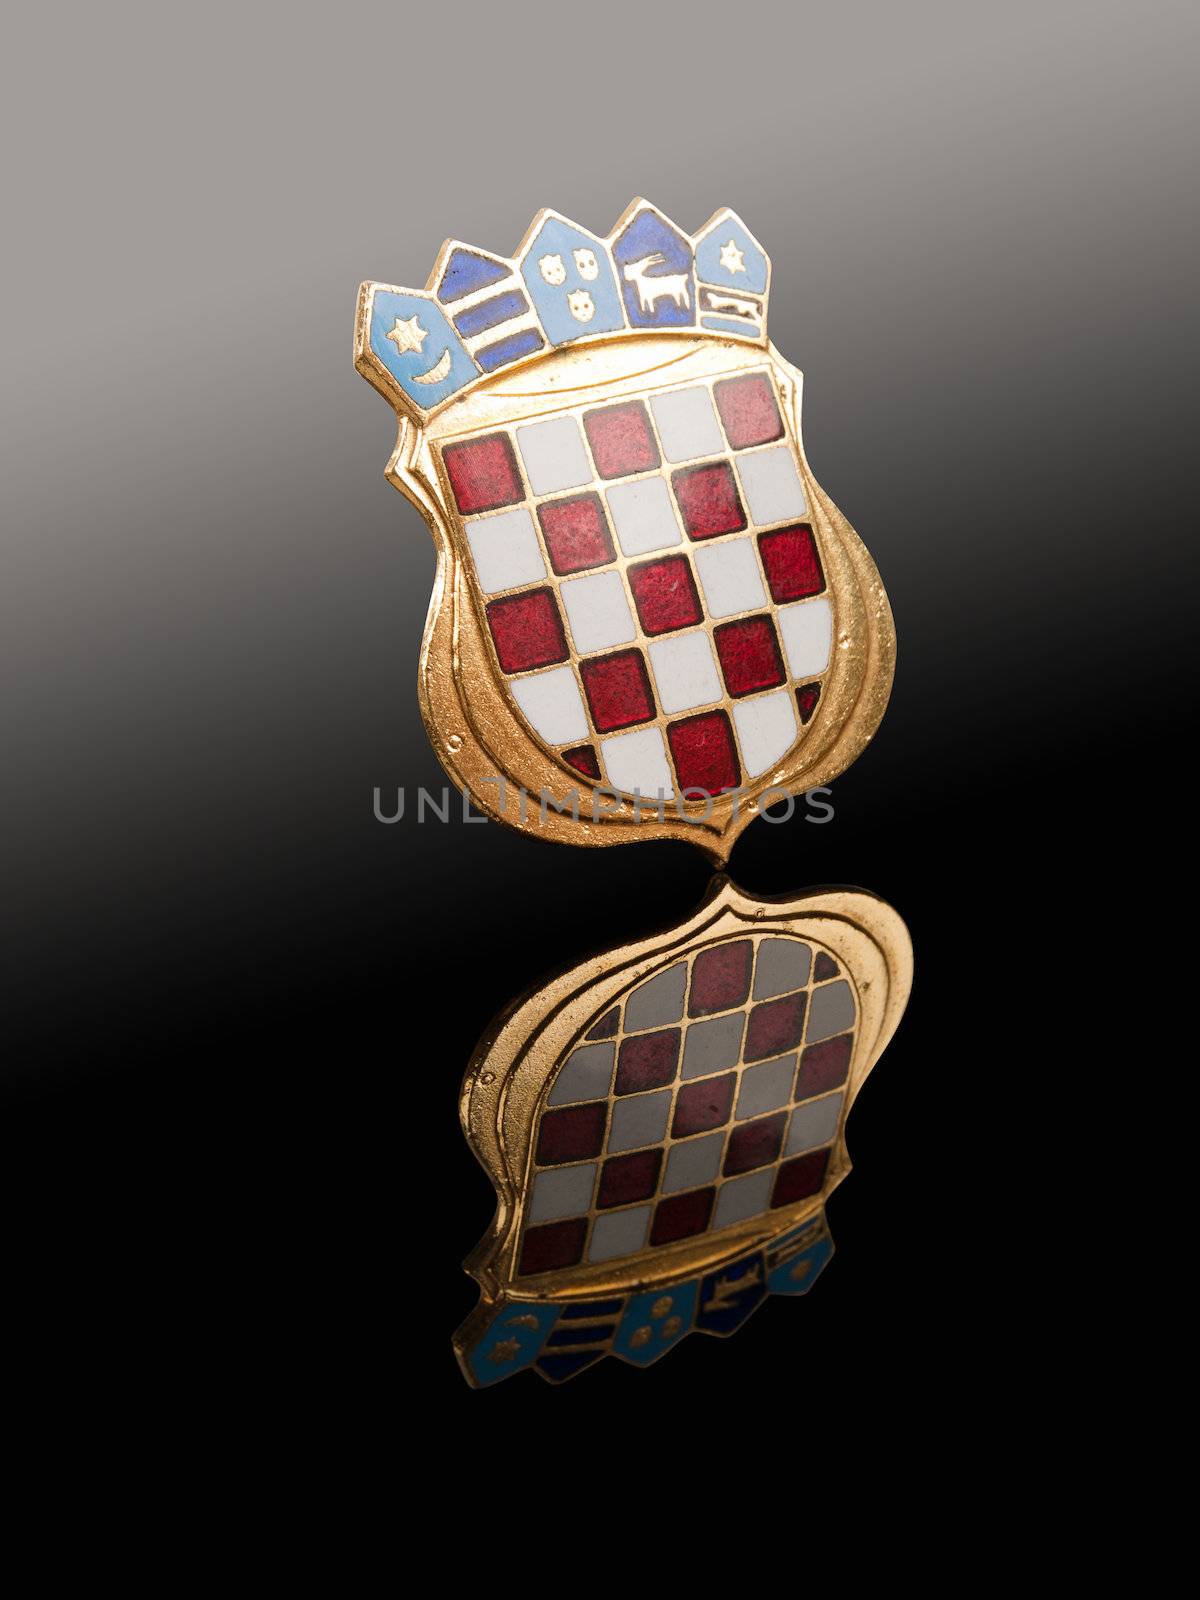 Croatia metal emblem with reflection, isolated